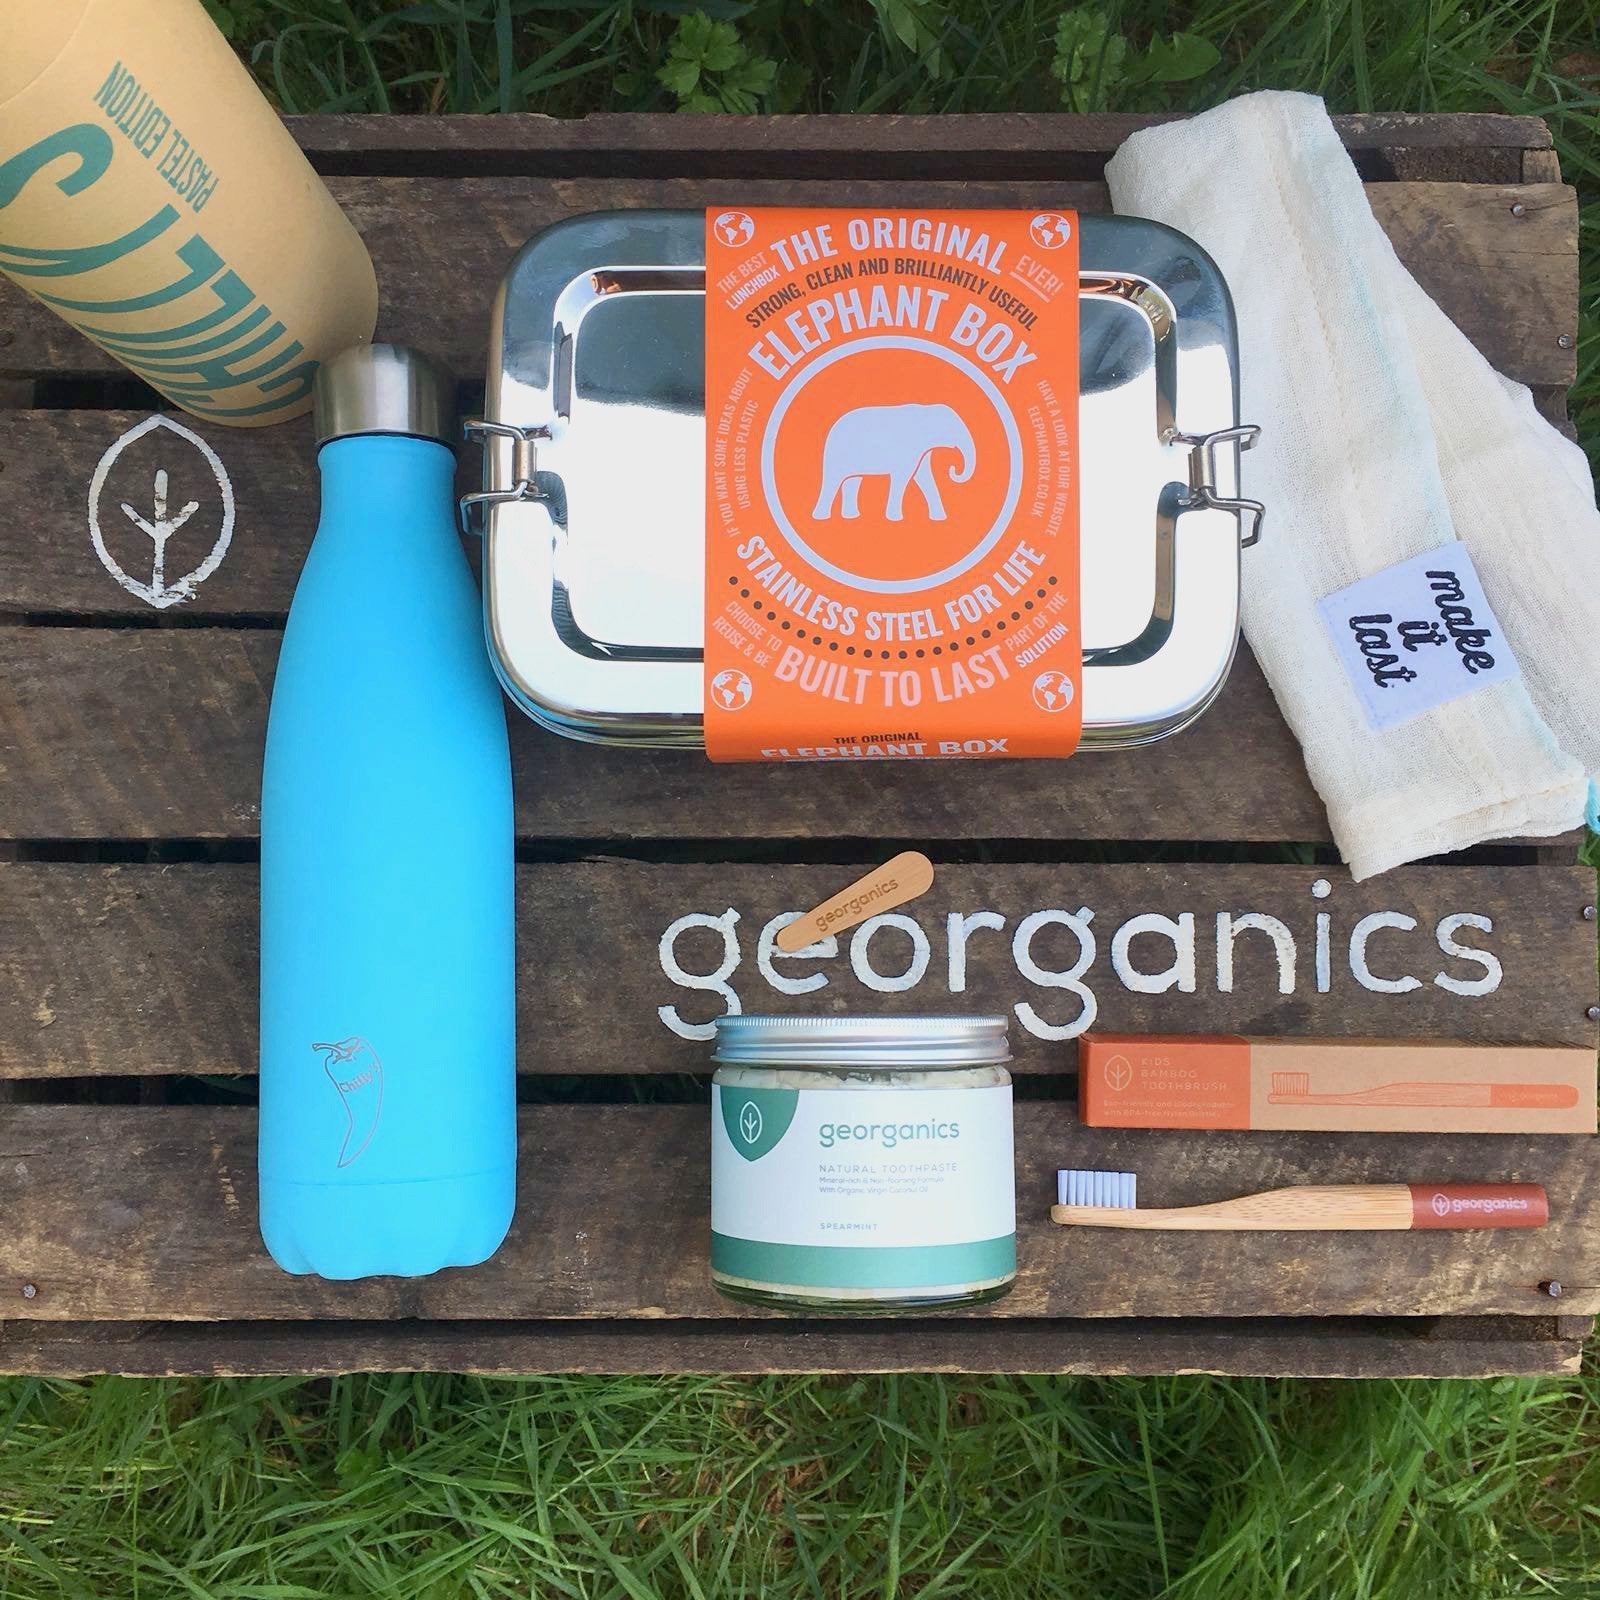 Plastic Free Swaps To Help The Earth